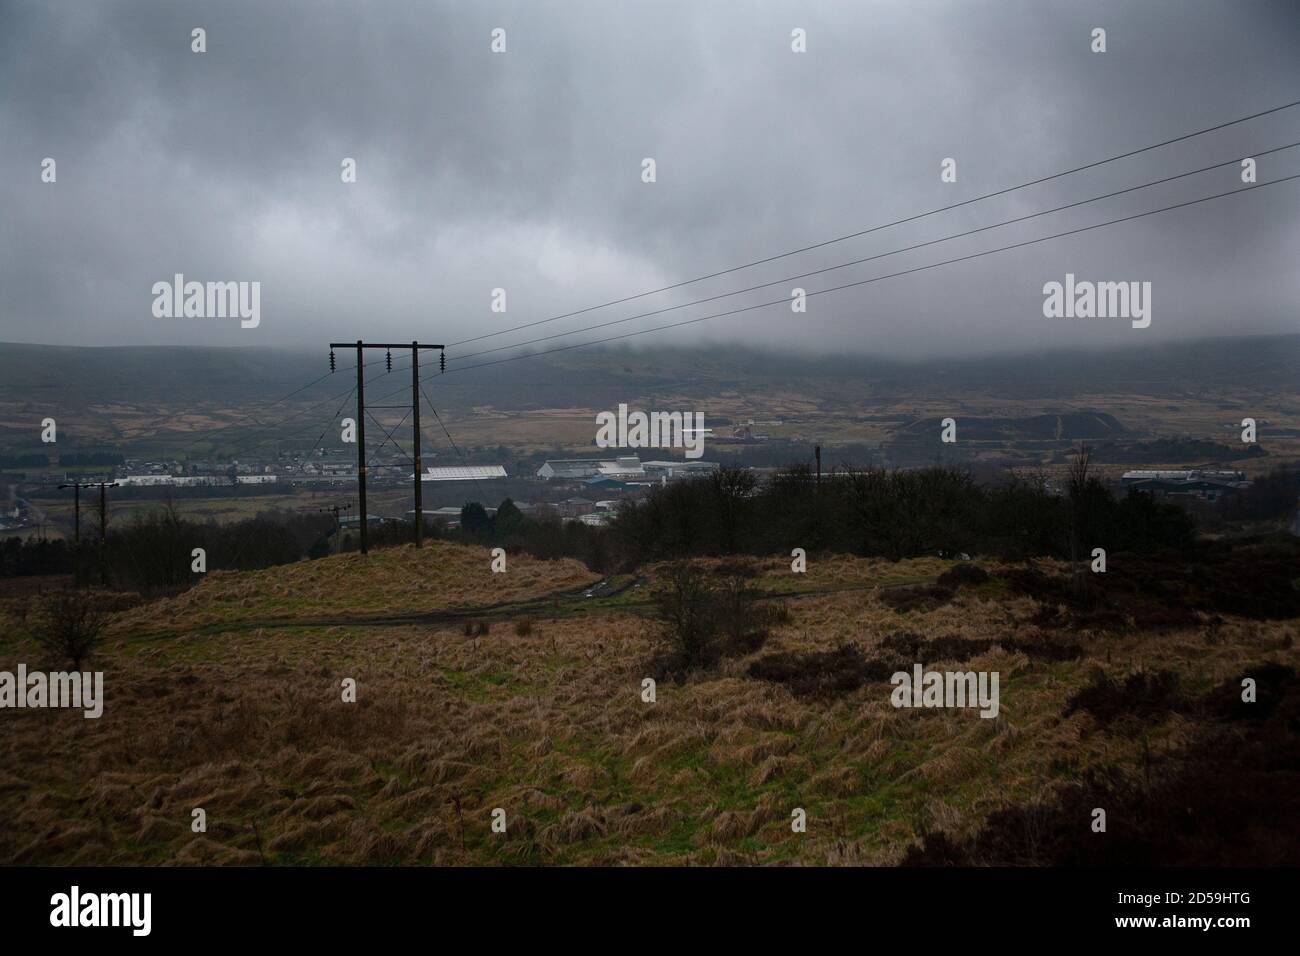 A view looking across the town of Blaenavon and the UNESCO World Heritage Site of Blaenavon Industrial Landscape, South Wales, United Kingdom Stock Photo